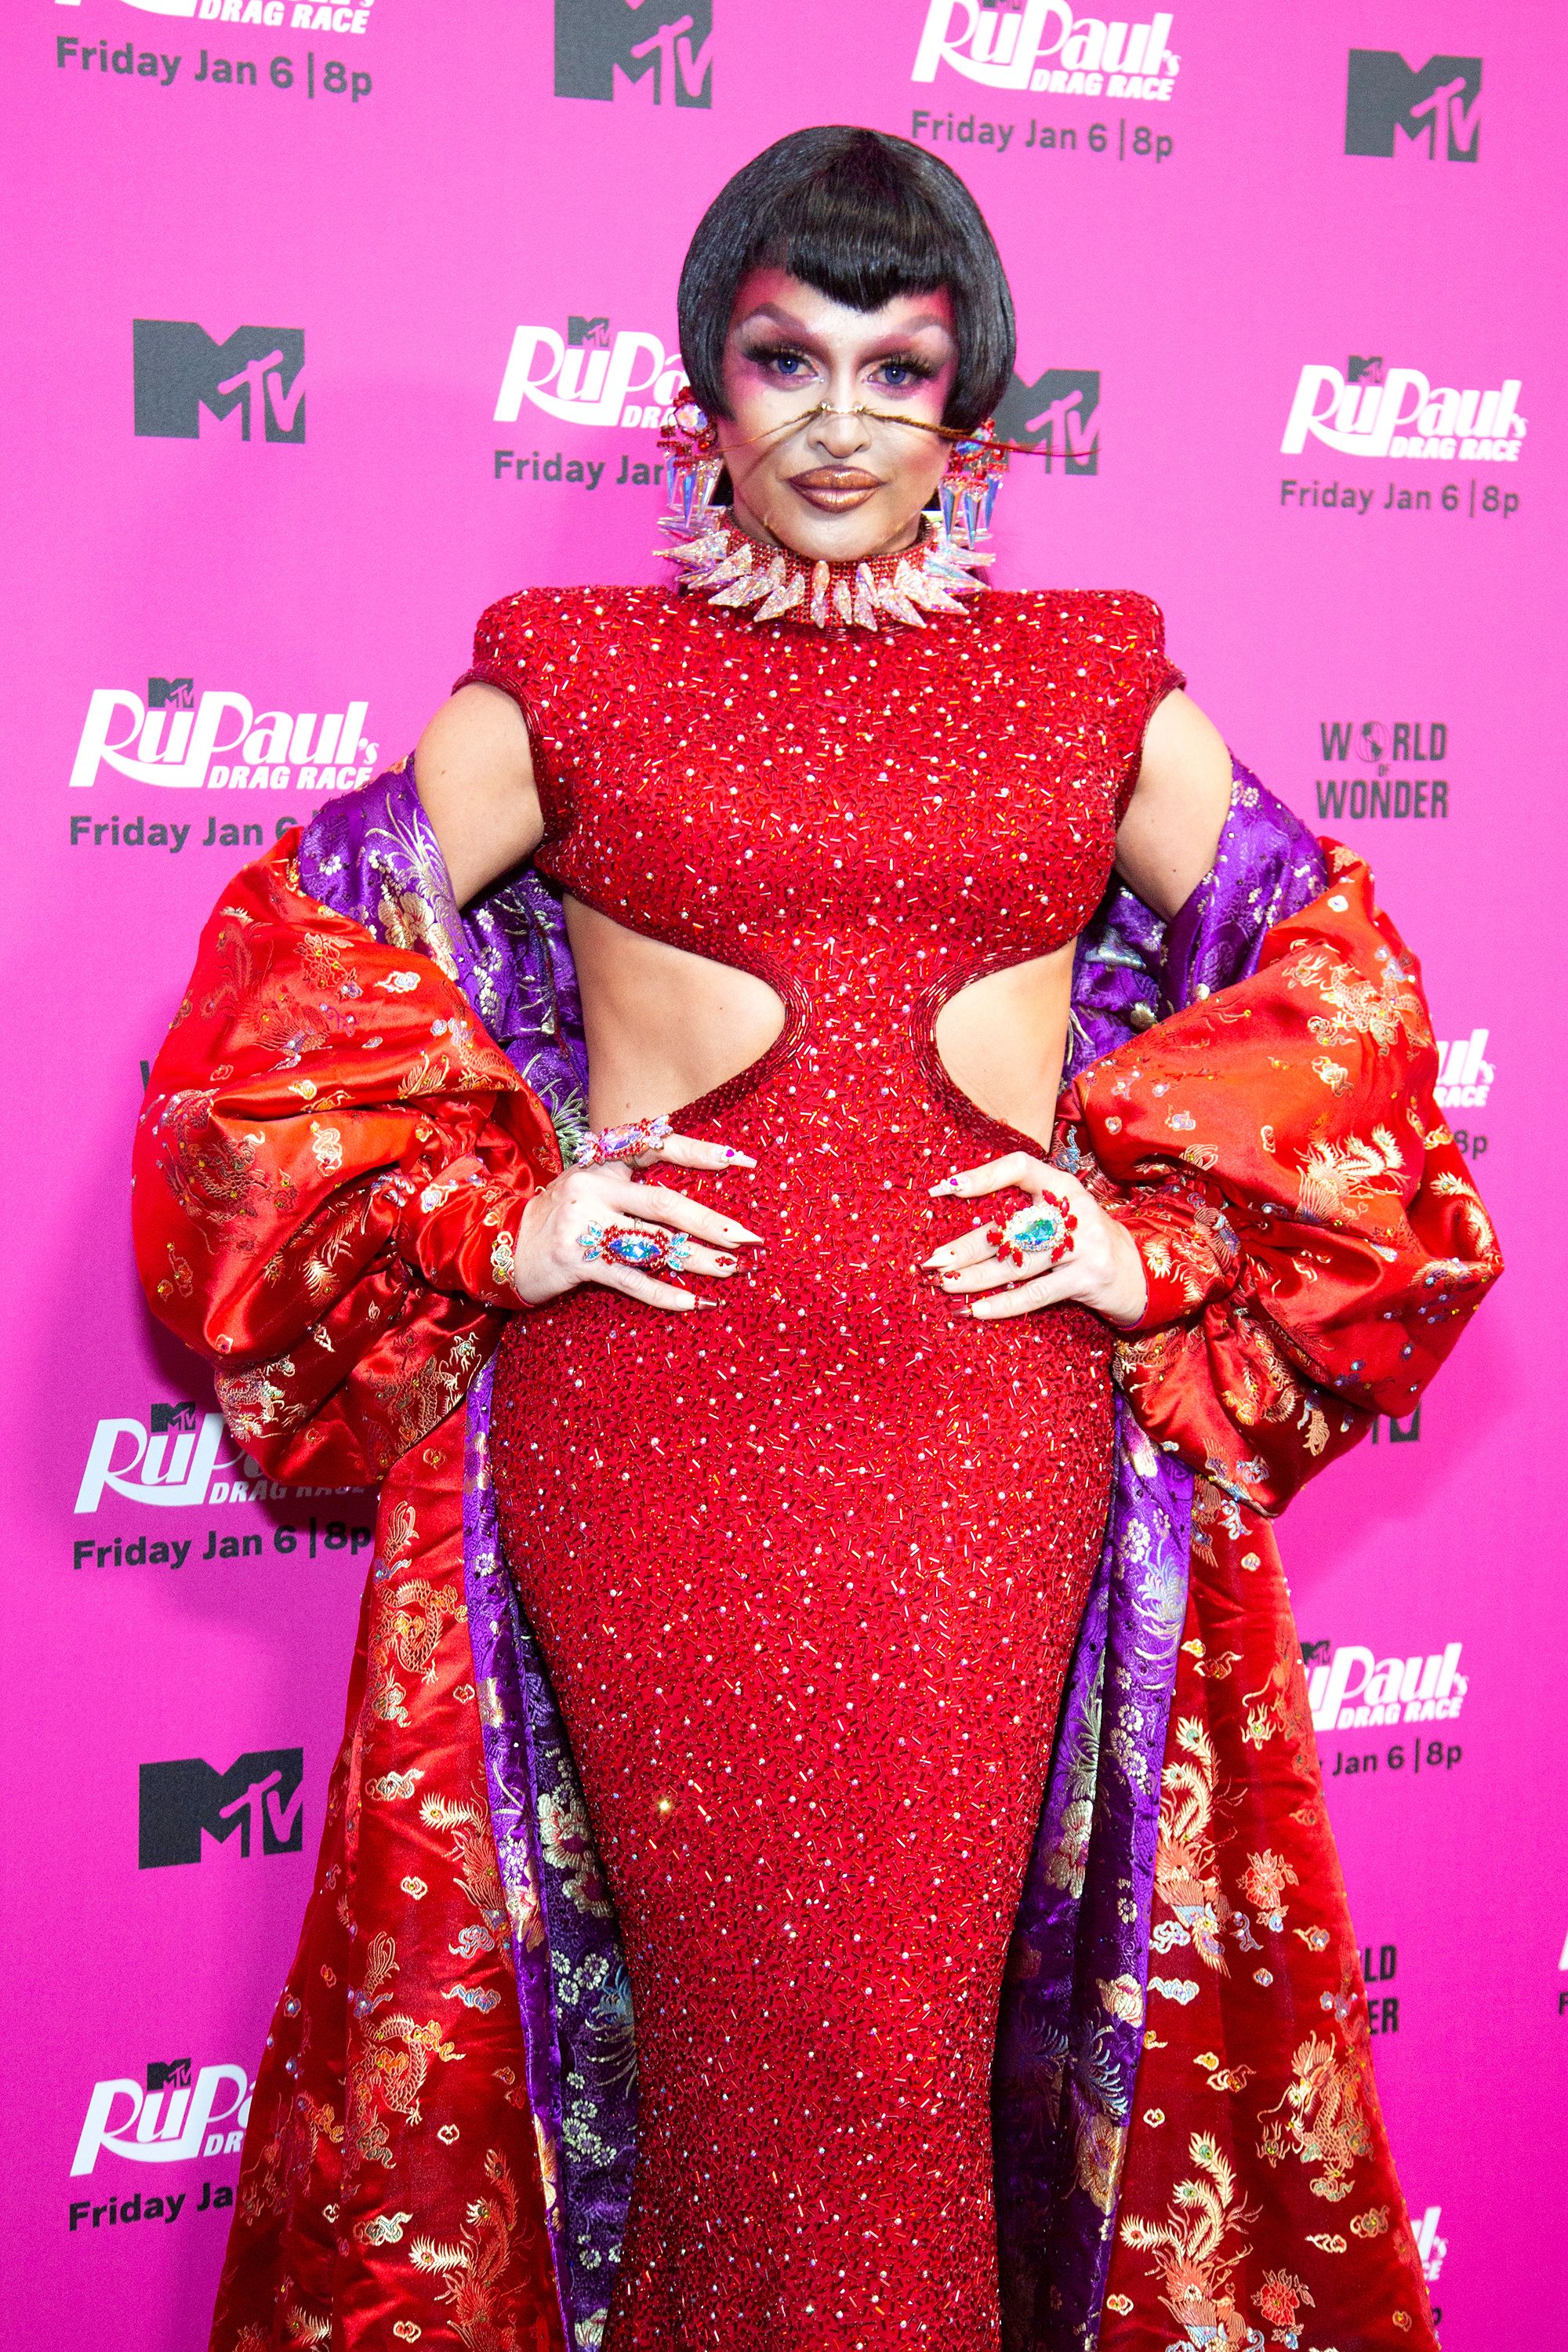 Drag Races Sasha Colby shares emotional meaning behind her talent show performance image